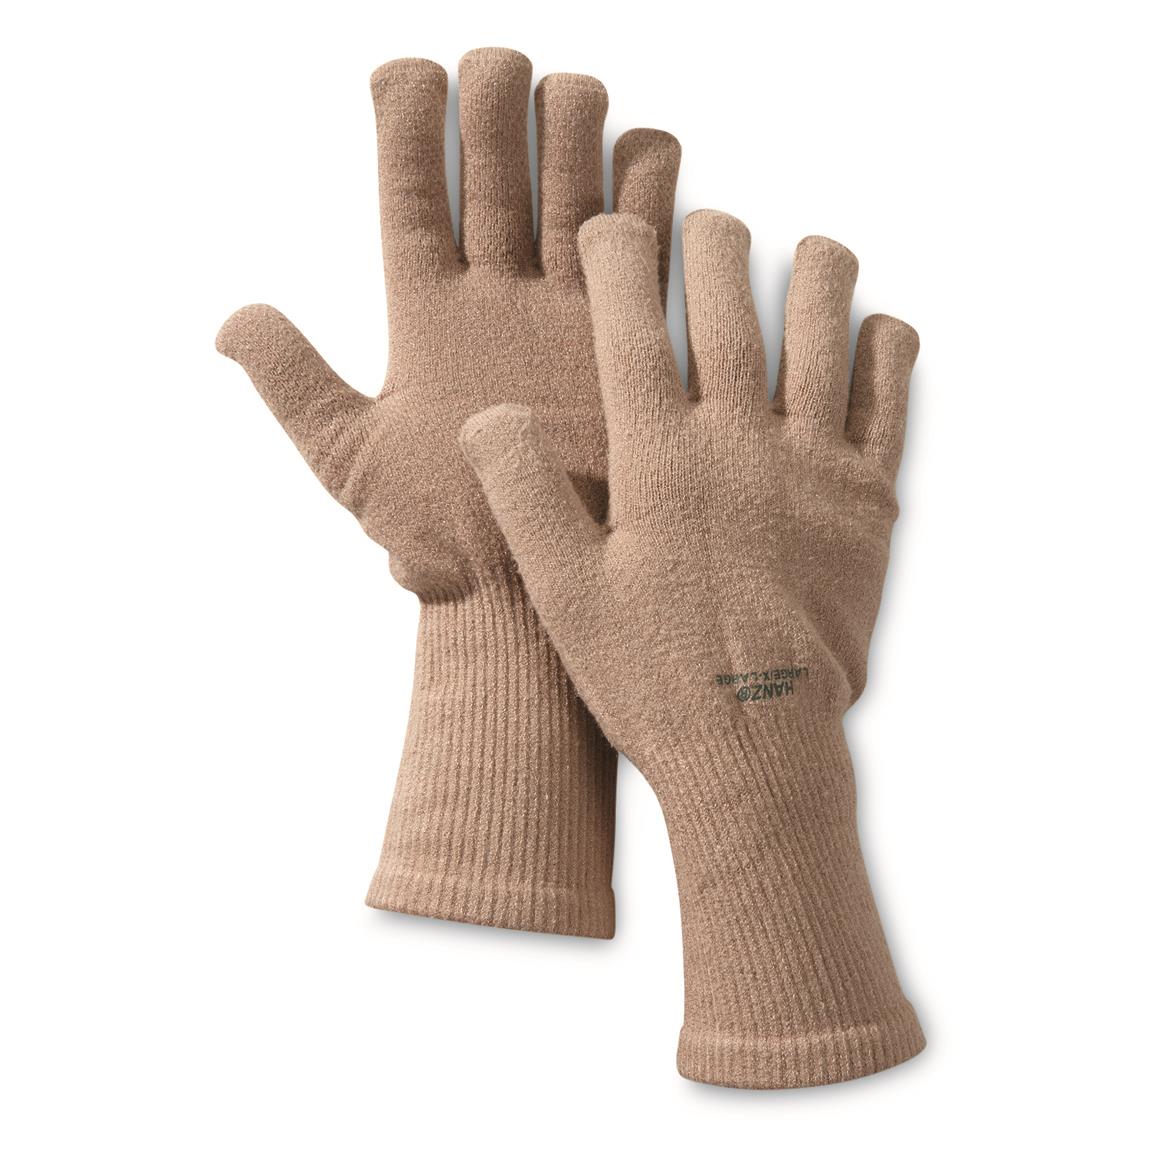 U.S. Military Surplus MCWCS Light Duty Flame Resistant Glove Inserts, 3 Pack, Used, Tan